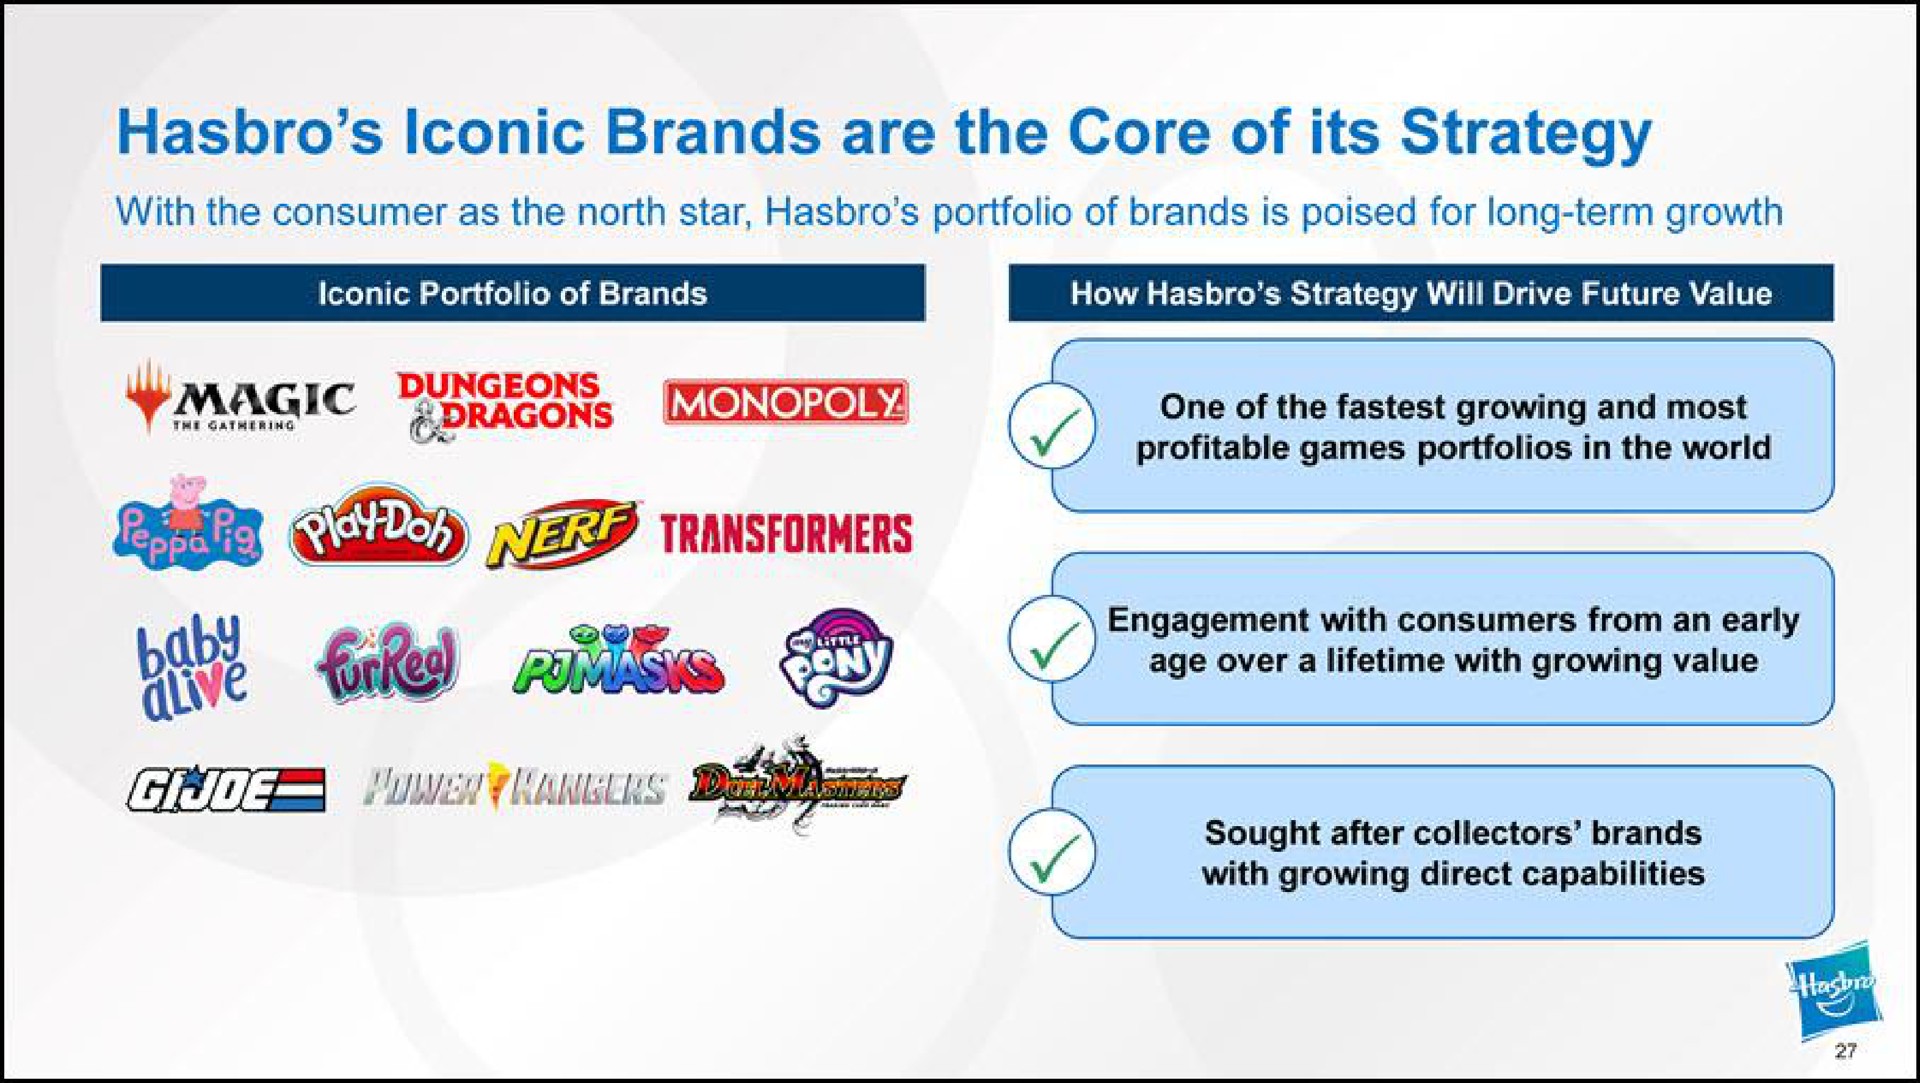 iconic brands are the core of its strategy with the consumer as the north star portfolio of brands is poised for long term growth iconic portfolio of brands how strategy will drive future value magic one of the growing and most profitable games portfolios in the world with growing direct capabilities engagement with consumers from an early age over a lifetime with growing value sought after collectors brands | Hasbro